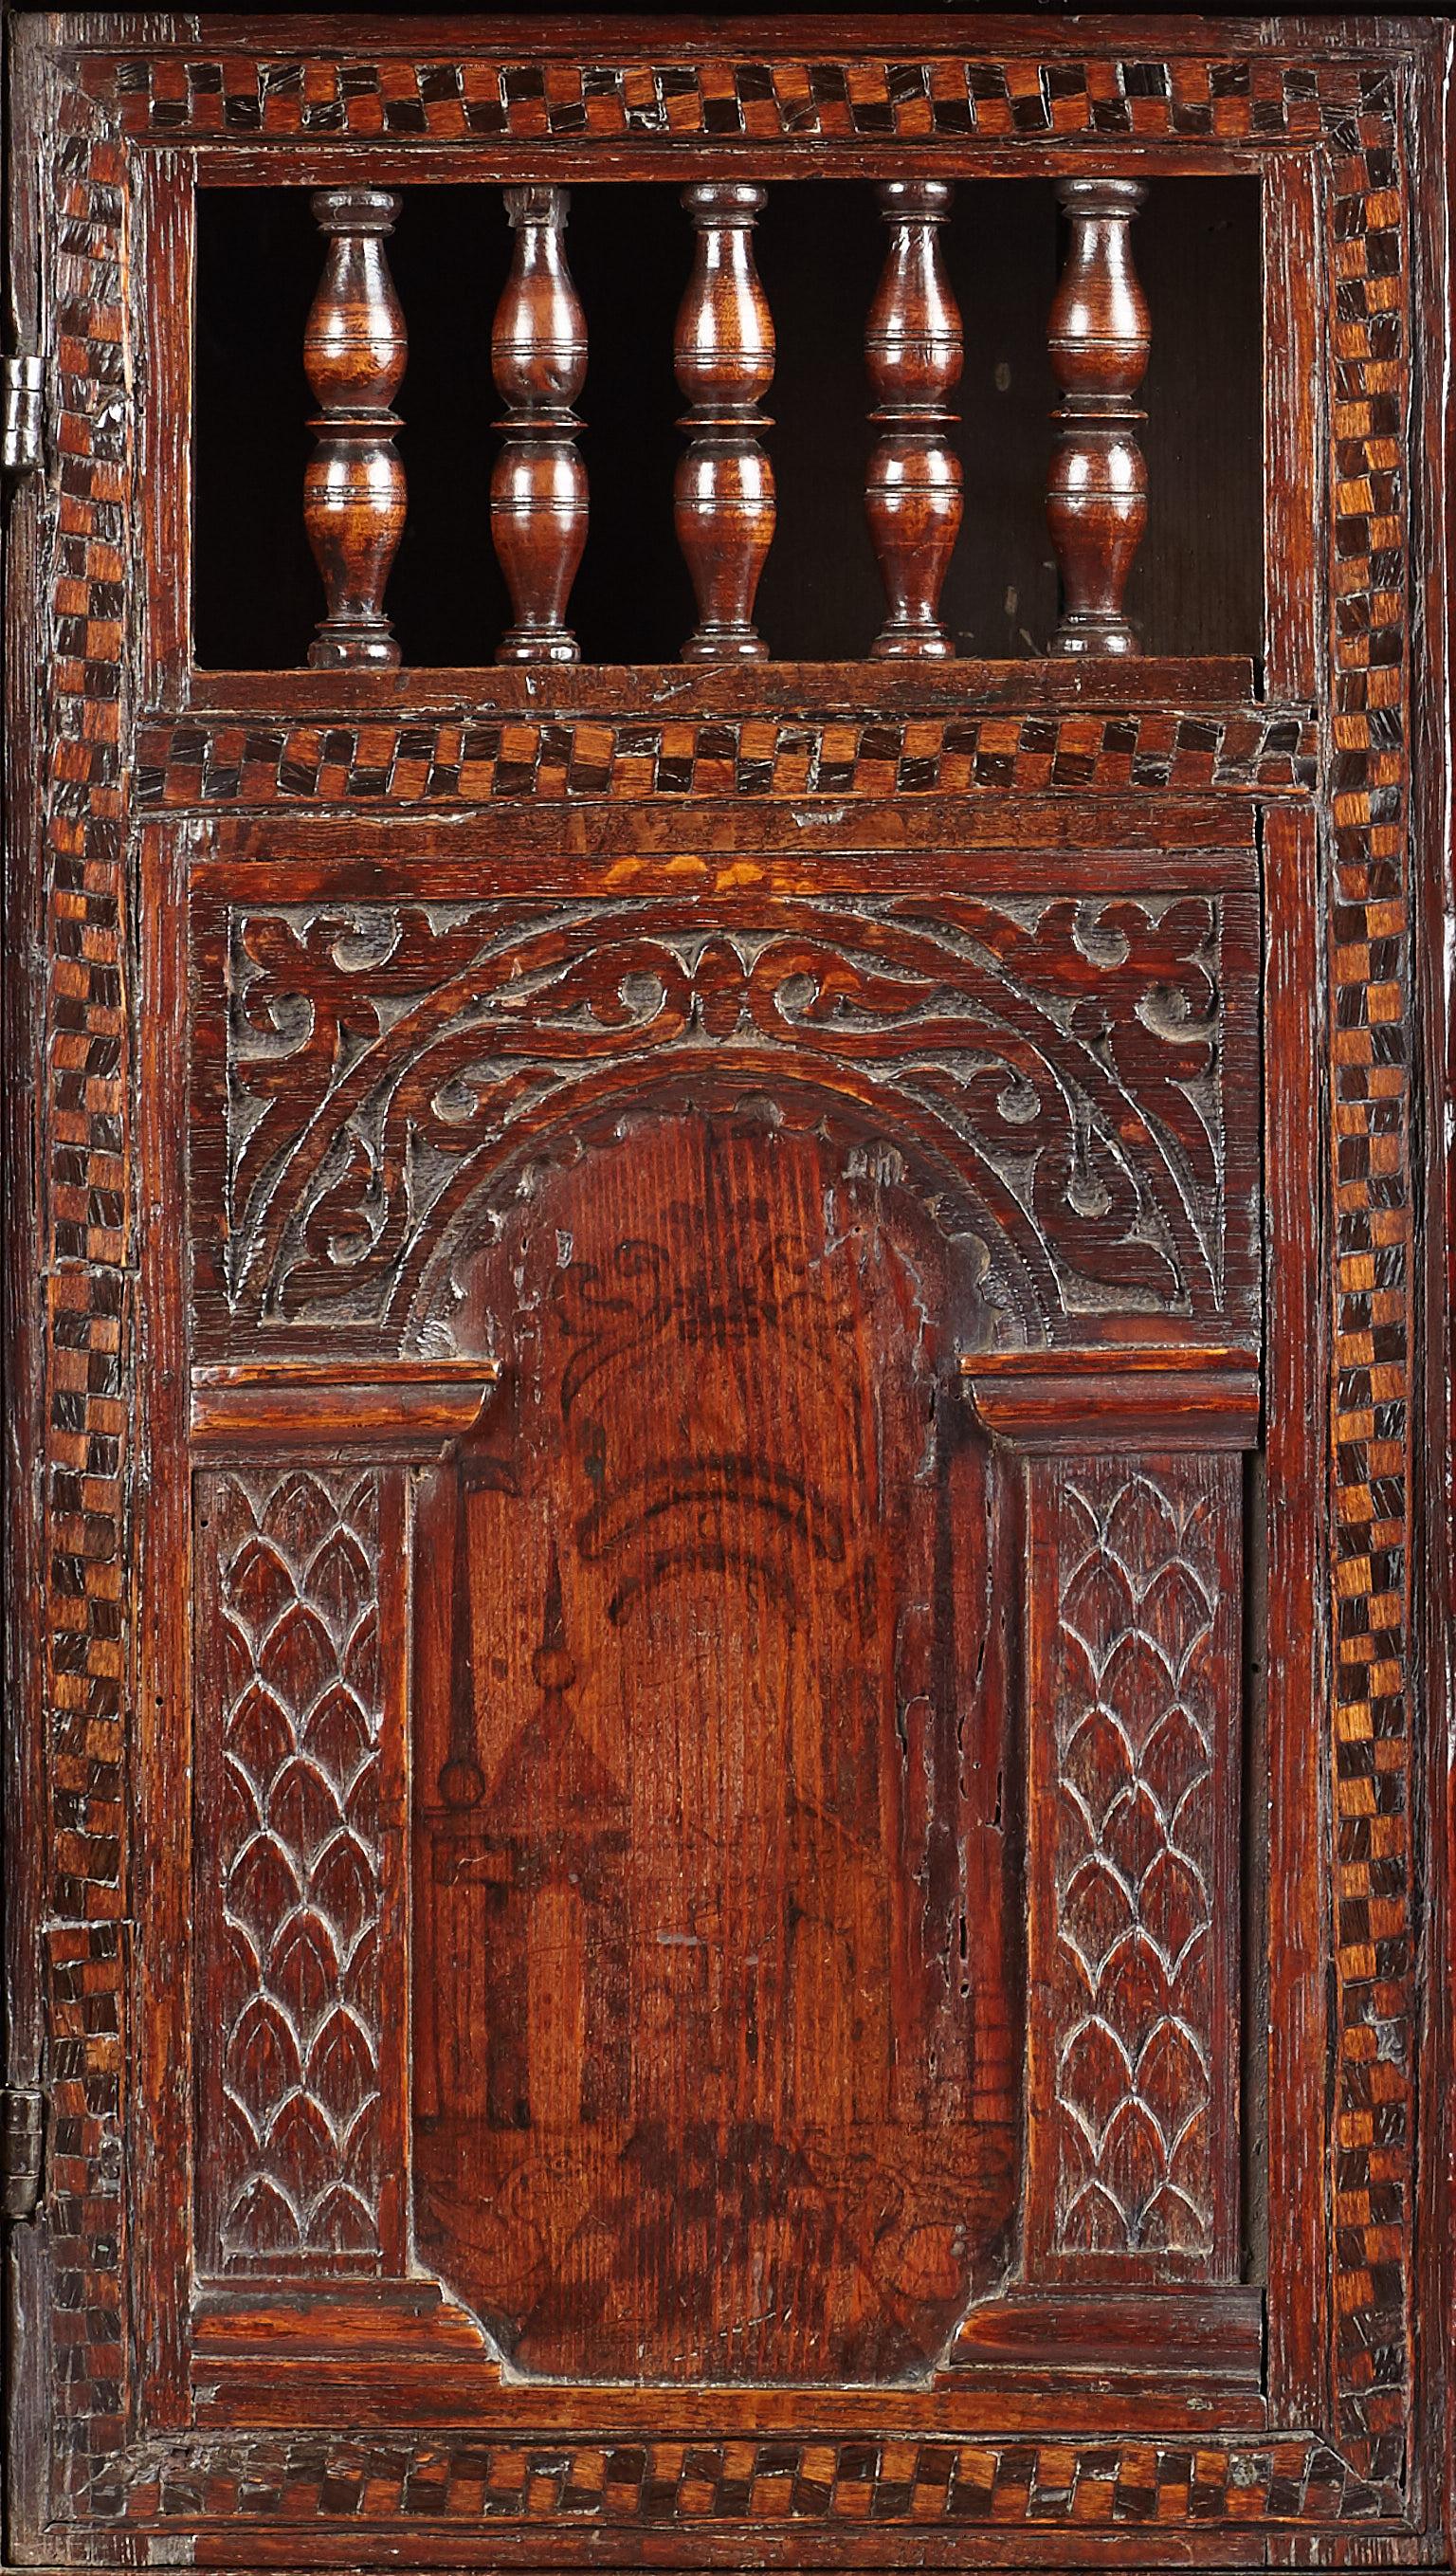 Rare small Late Elizabethan painted pine, oak, parquetry and pen-work decorated mural / glass cupboard,
English, circa 1580-1600.

Featuring black and colored pen-work decoration simulating floral inlays on the upper friezes, divided by lion and